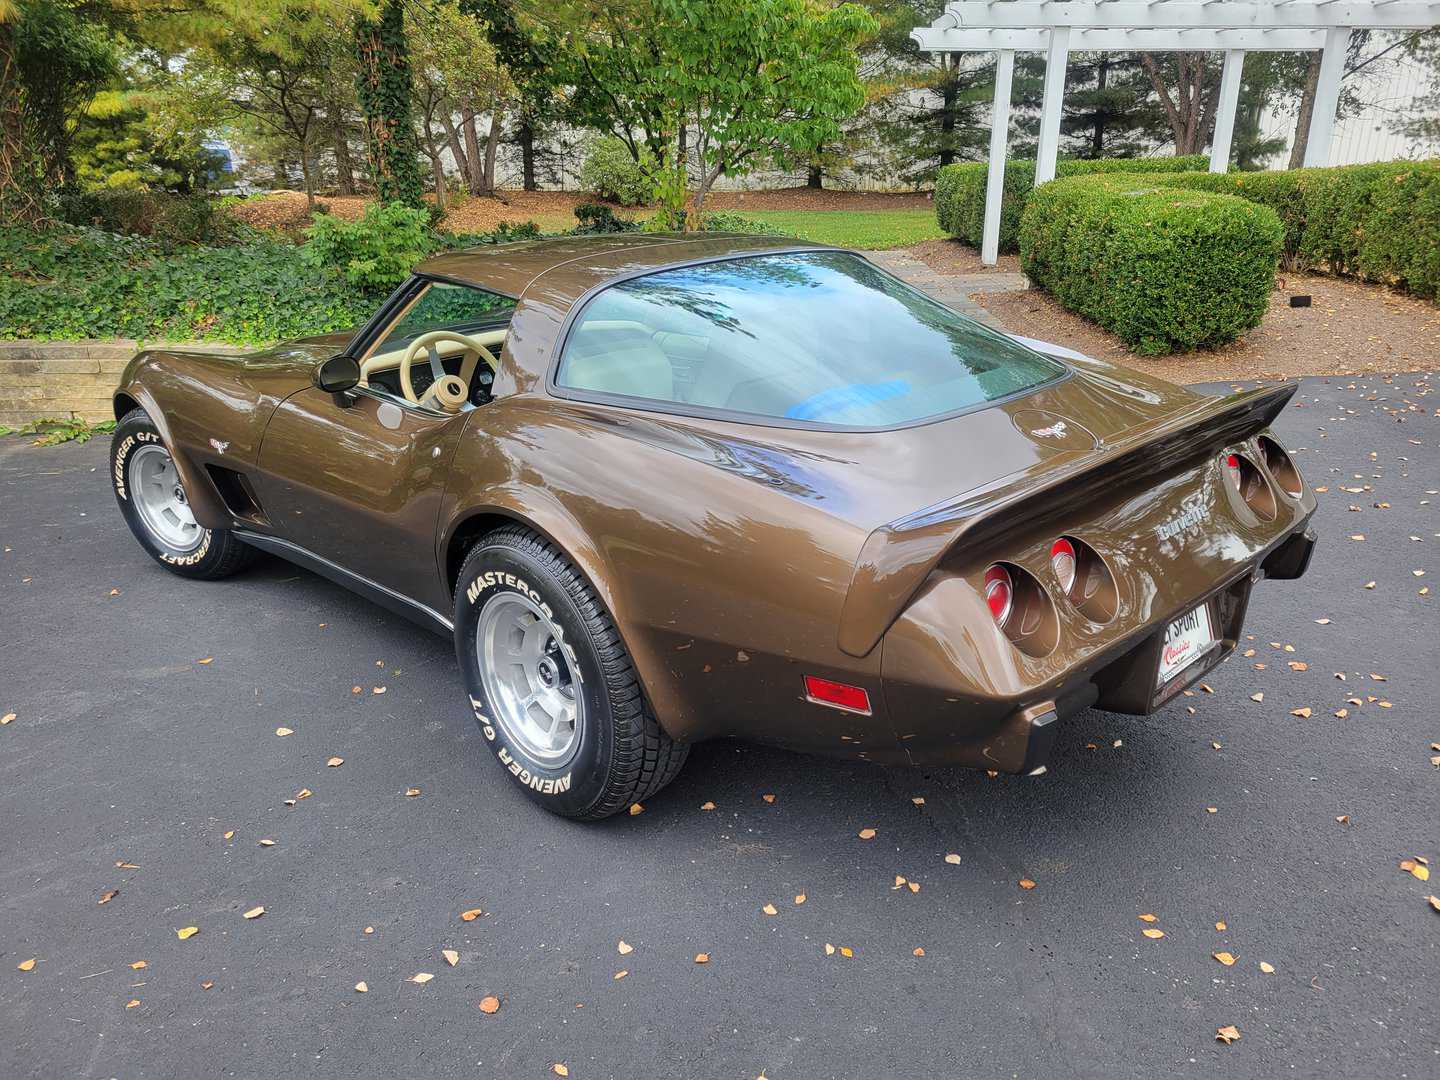 A 1979 brown chevrolet corvette parked in a driveway.